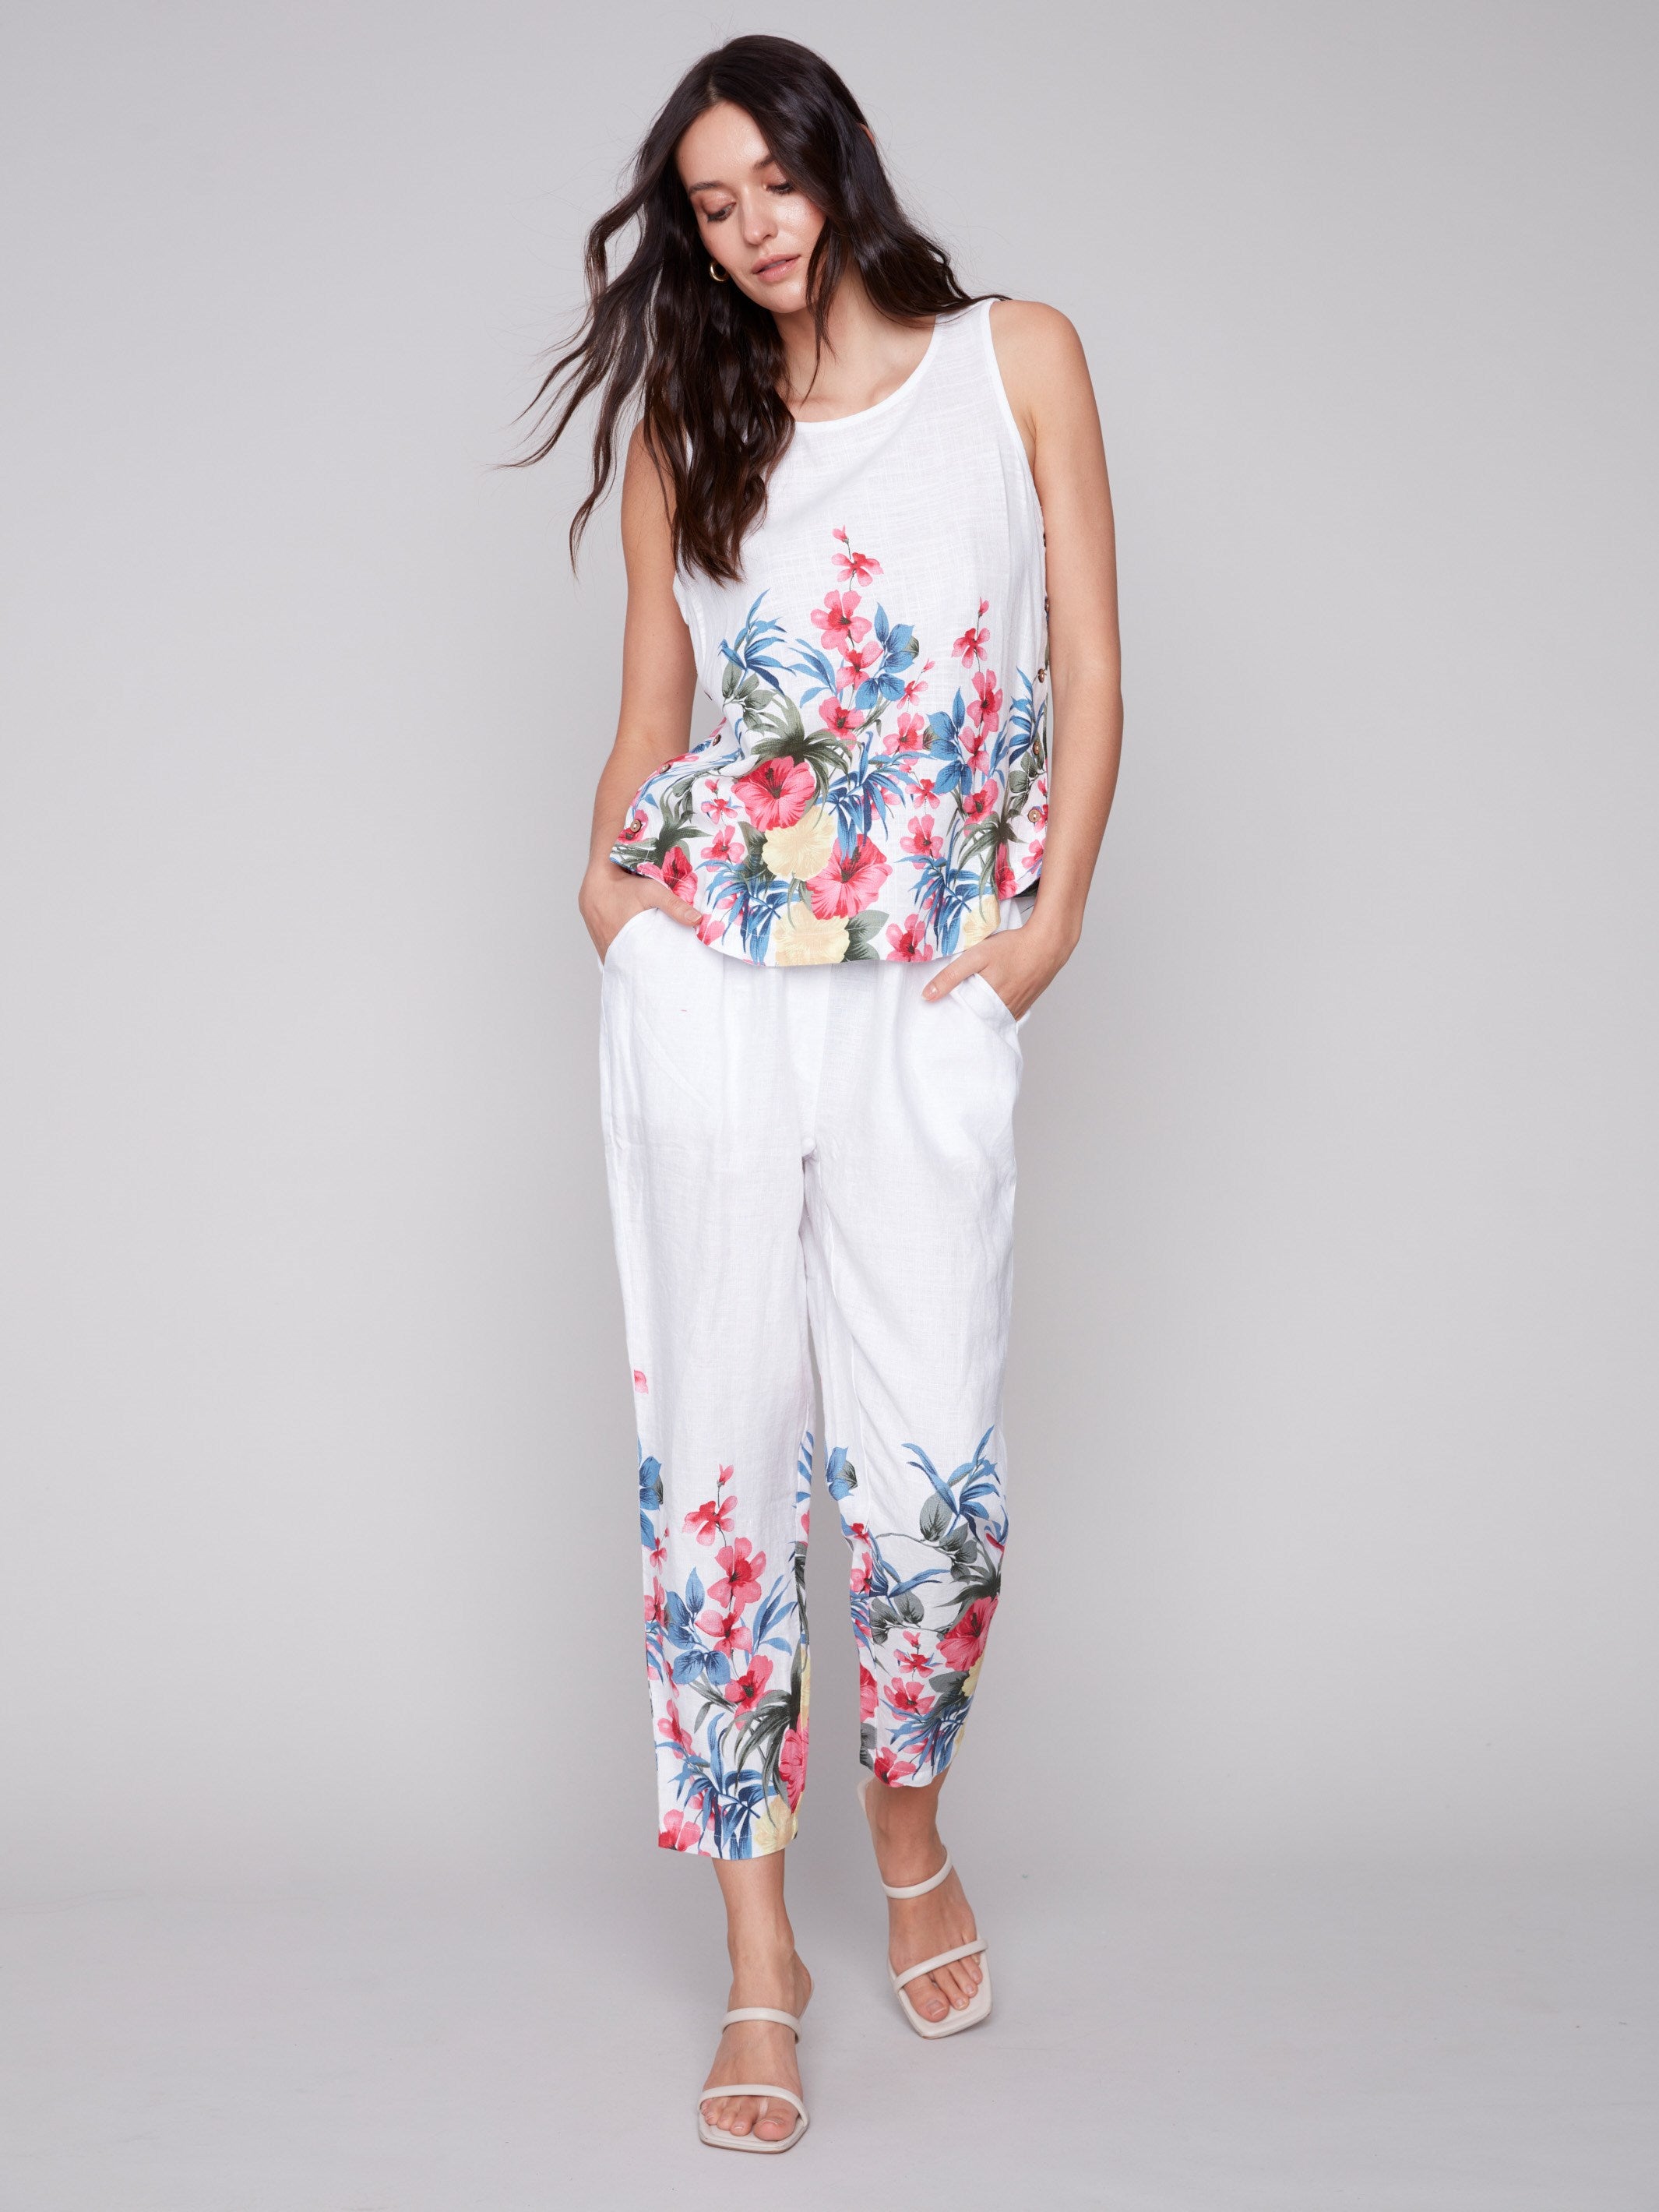 Printed Linen Pull-On Pants - Maui - Charlie B Collection Canada - Image 4